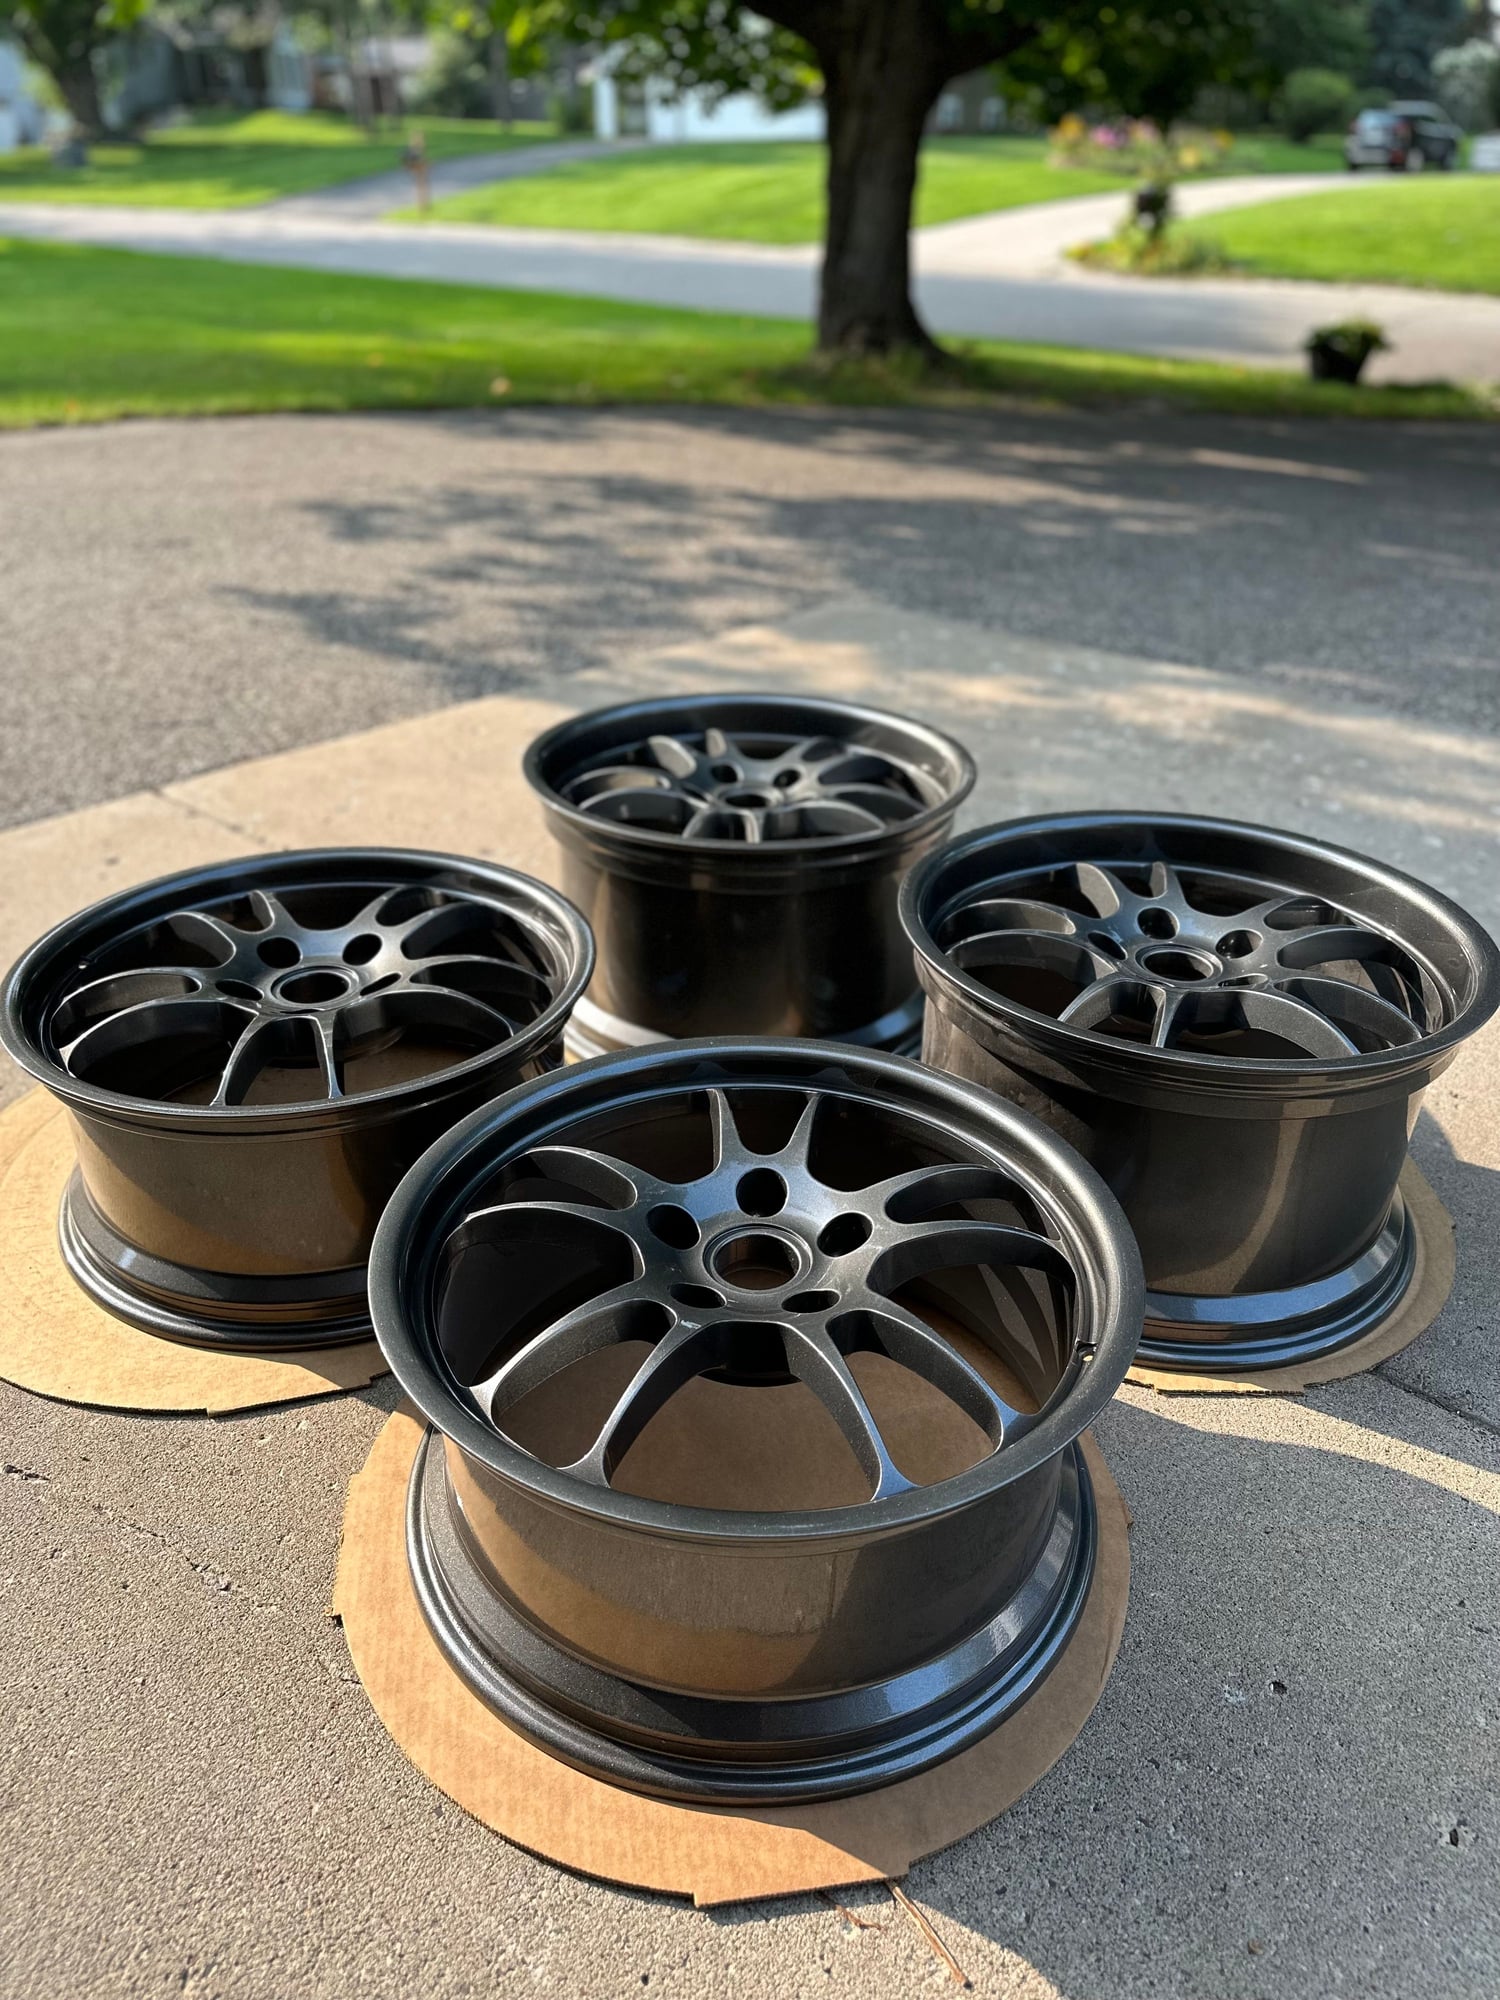 2019 Porsche GT3 - 19" CCW T10 Monoblock Forged Lightweight Wheels - Mint - NB 997 996 993 - Accessories - $2,500 - Plymouth, MN 55447, United States